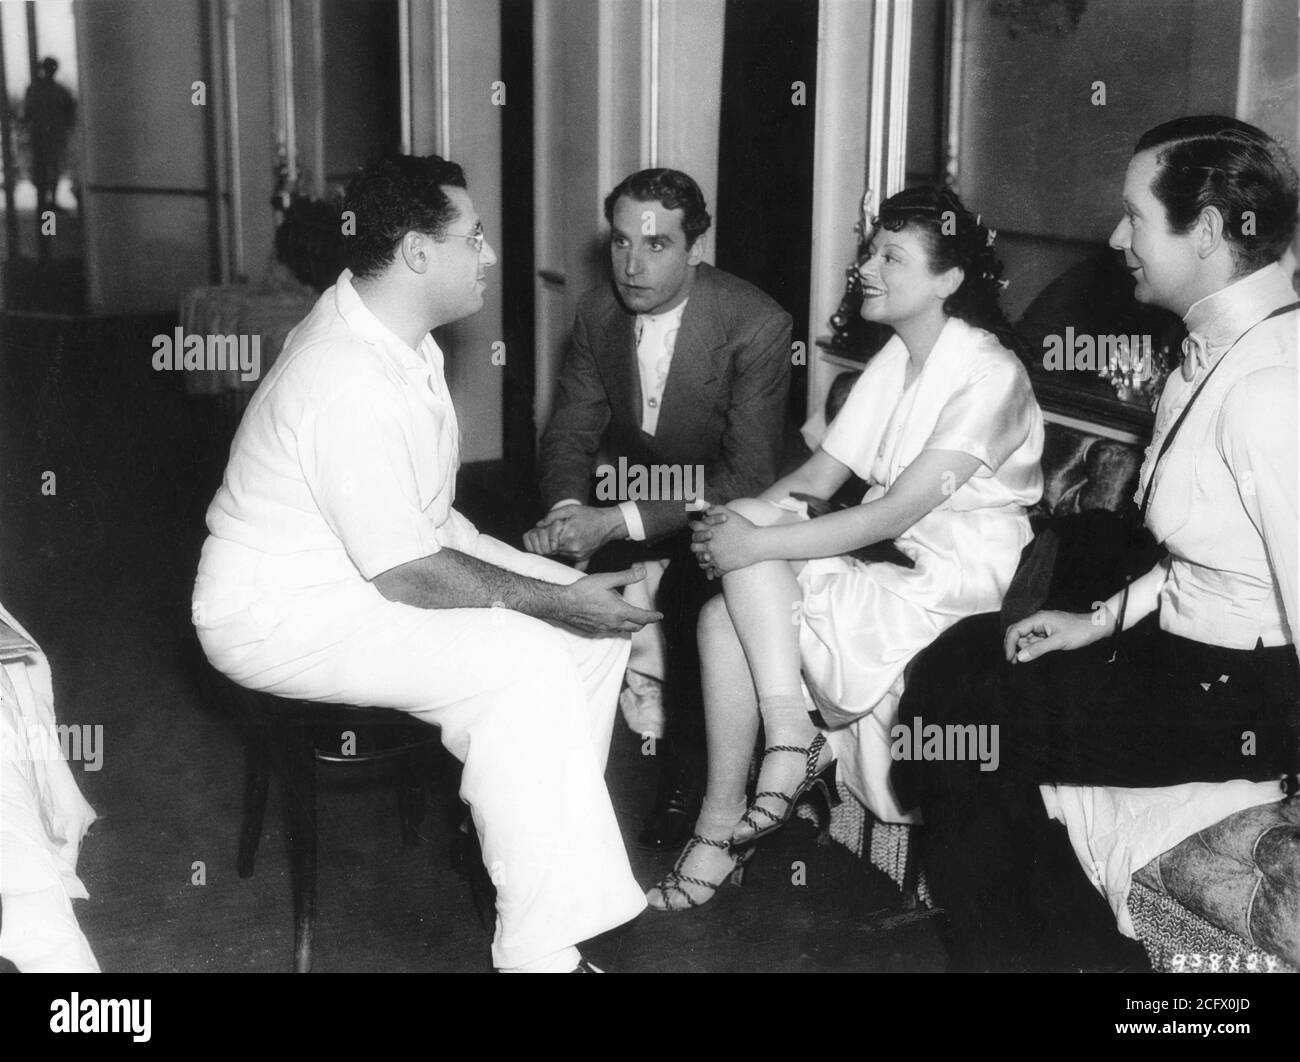 GEORGE CUKOR HENRY DANIELL LENORE ULRIC and REX O'MALLEY on set candid  during filming of CAMILLE 1936 director GEORGE CUKOR novel / play Alexandre  Dumas fils Metro Goldwyn Mayer Stock Photo - Alamy